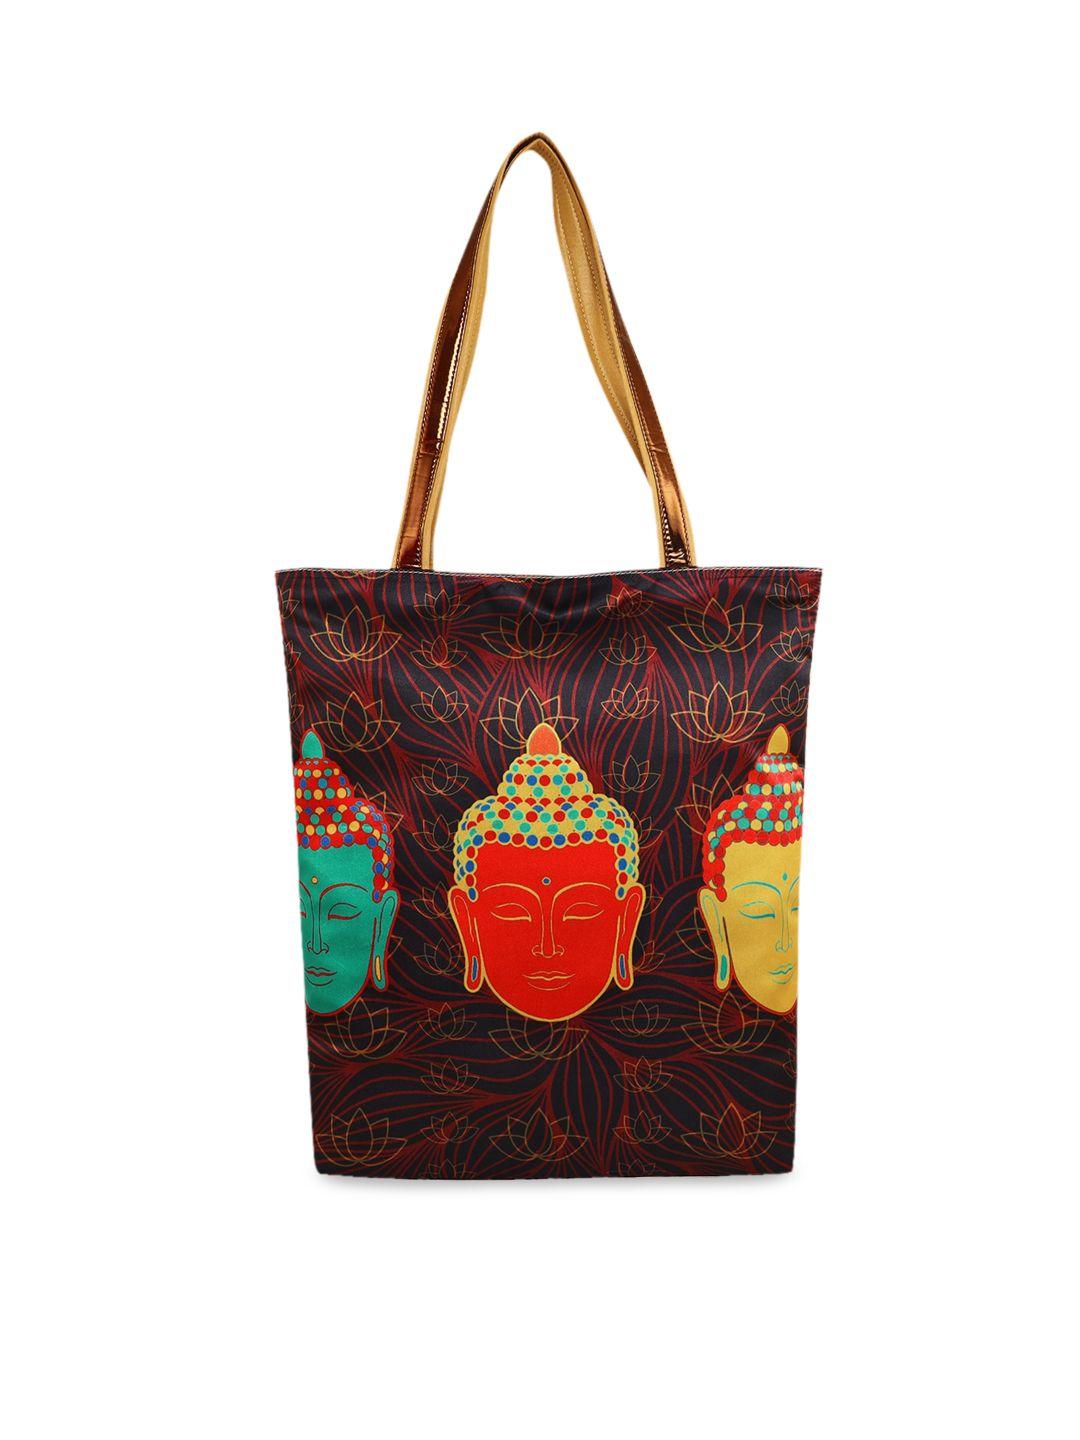 sabhyata multicoloured printed tote bag for women with applique